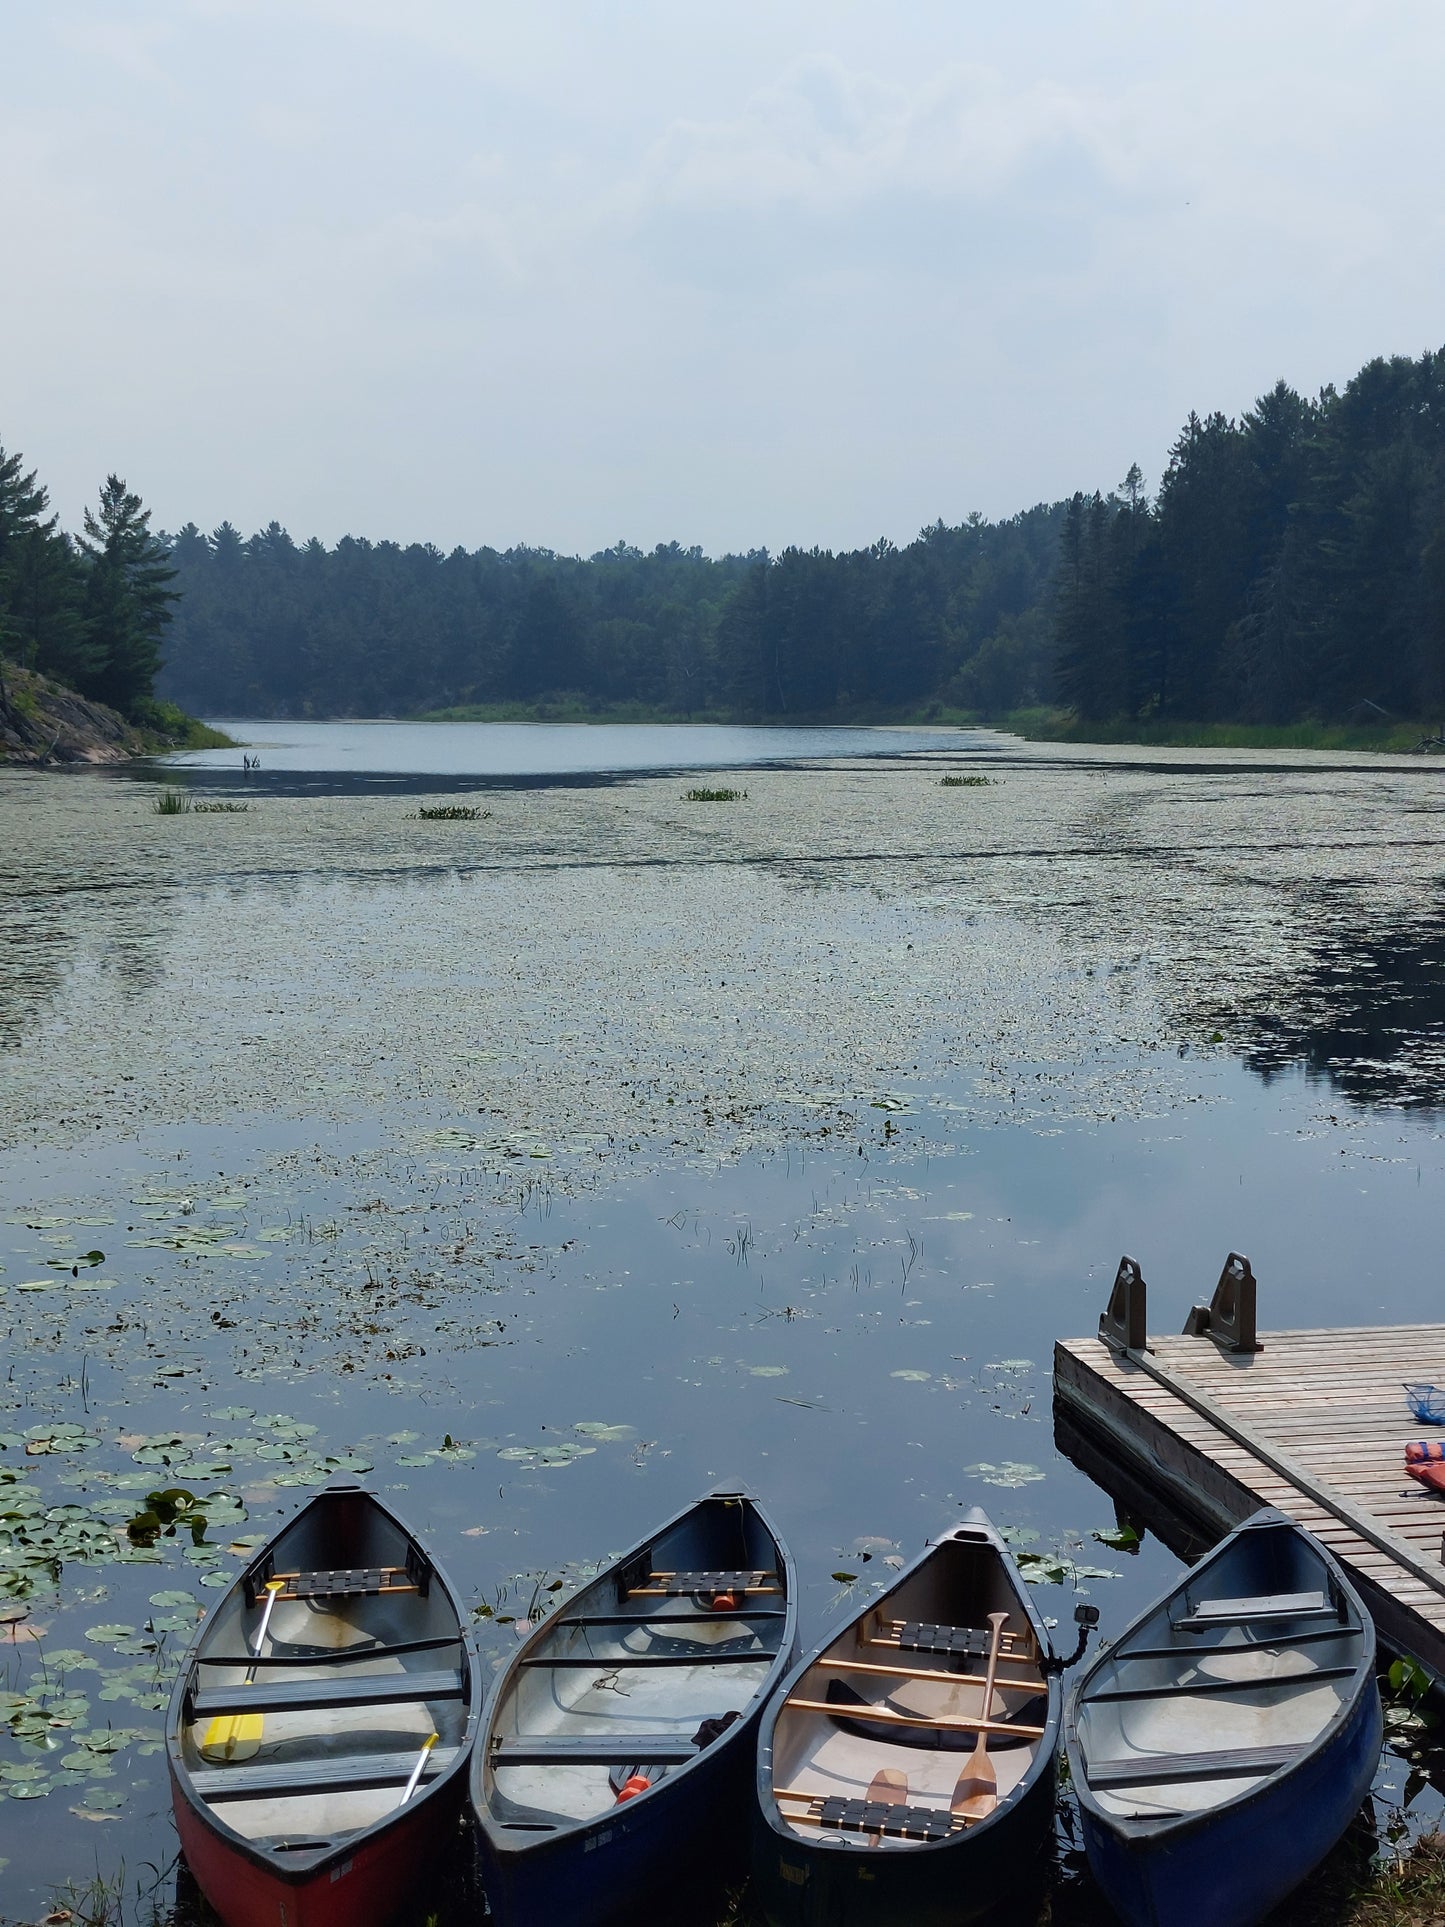 Canoe Rental Option for Convenience: Don't have a canoe? No problem! Opt to rent one for $40, which includes the use of a canoe, paddle, and PFD. Alternatively, you're welcome to bring your own equipment.